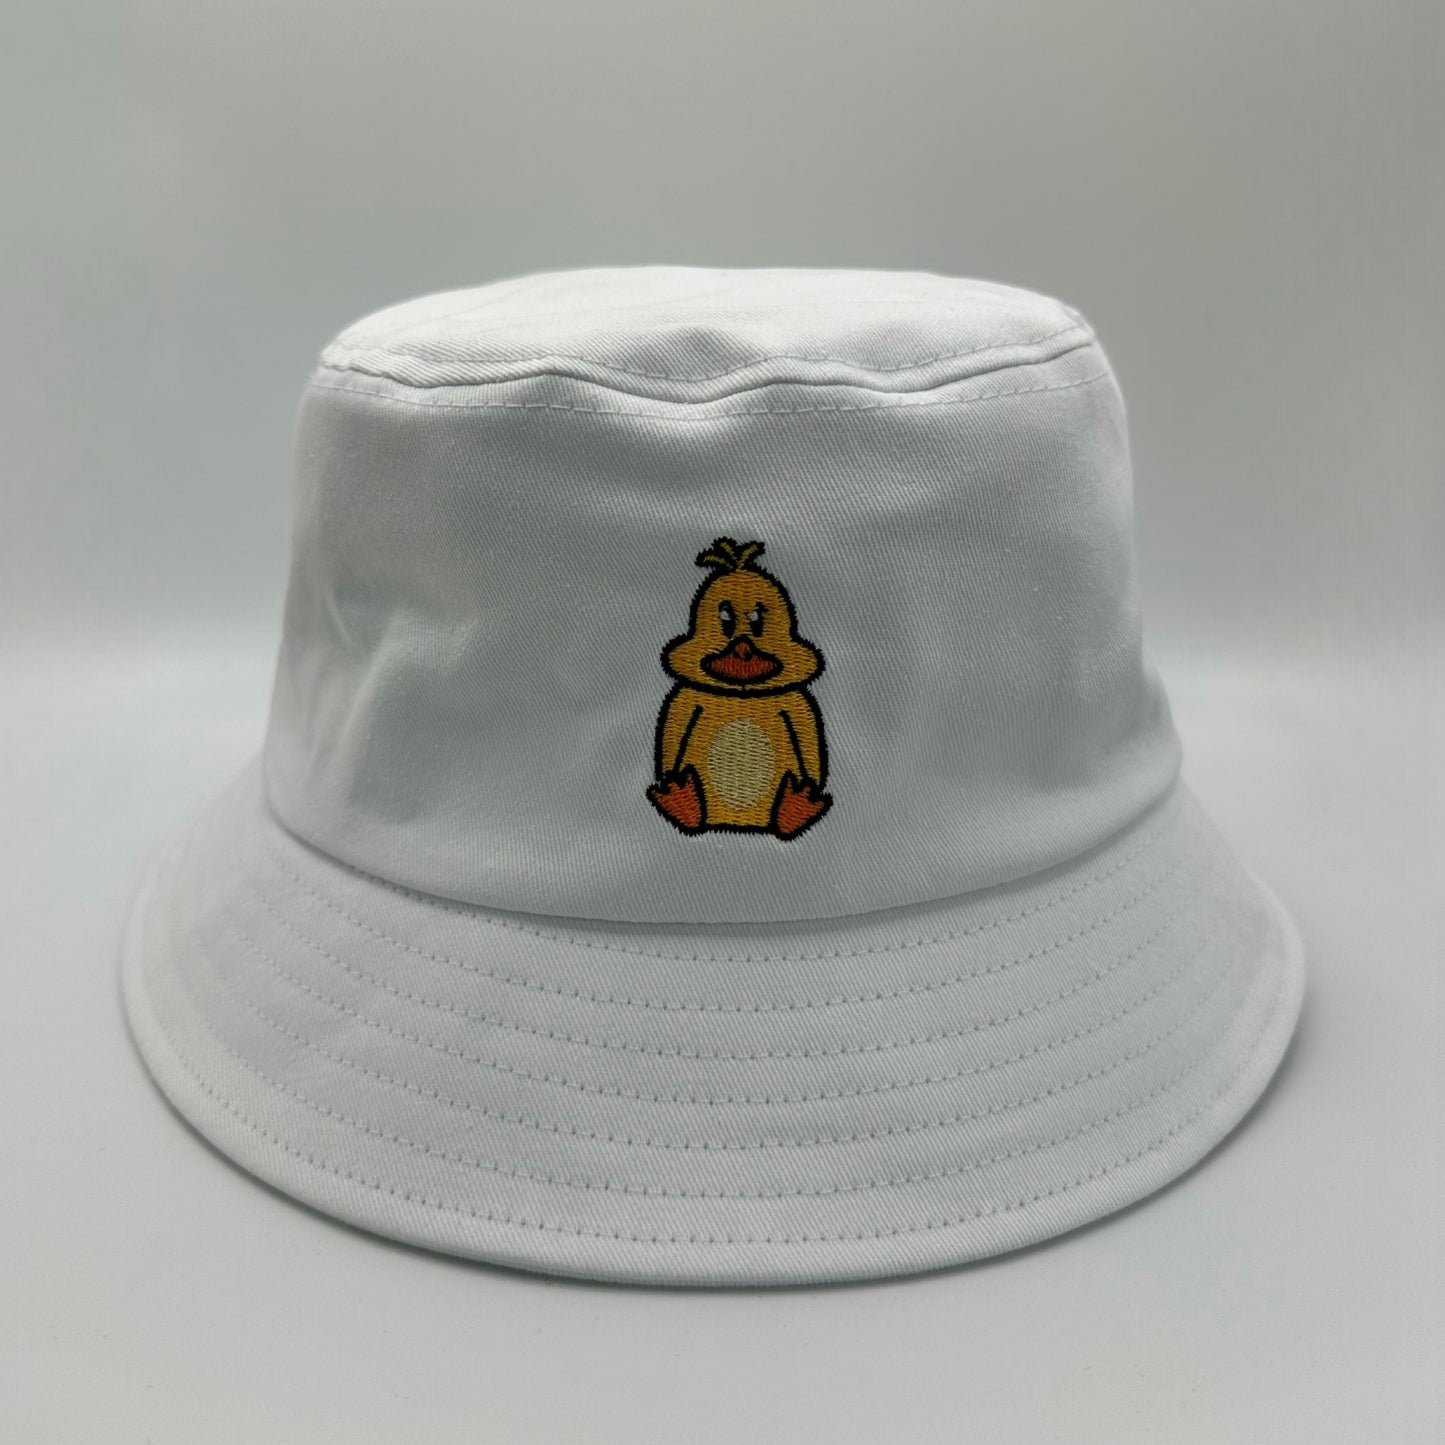 The Official Duckett's Bucket Hat - White